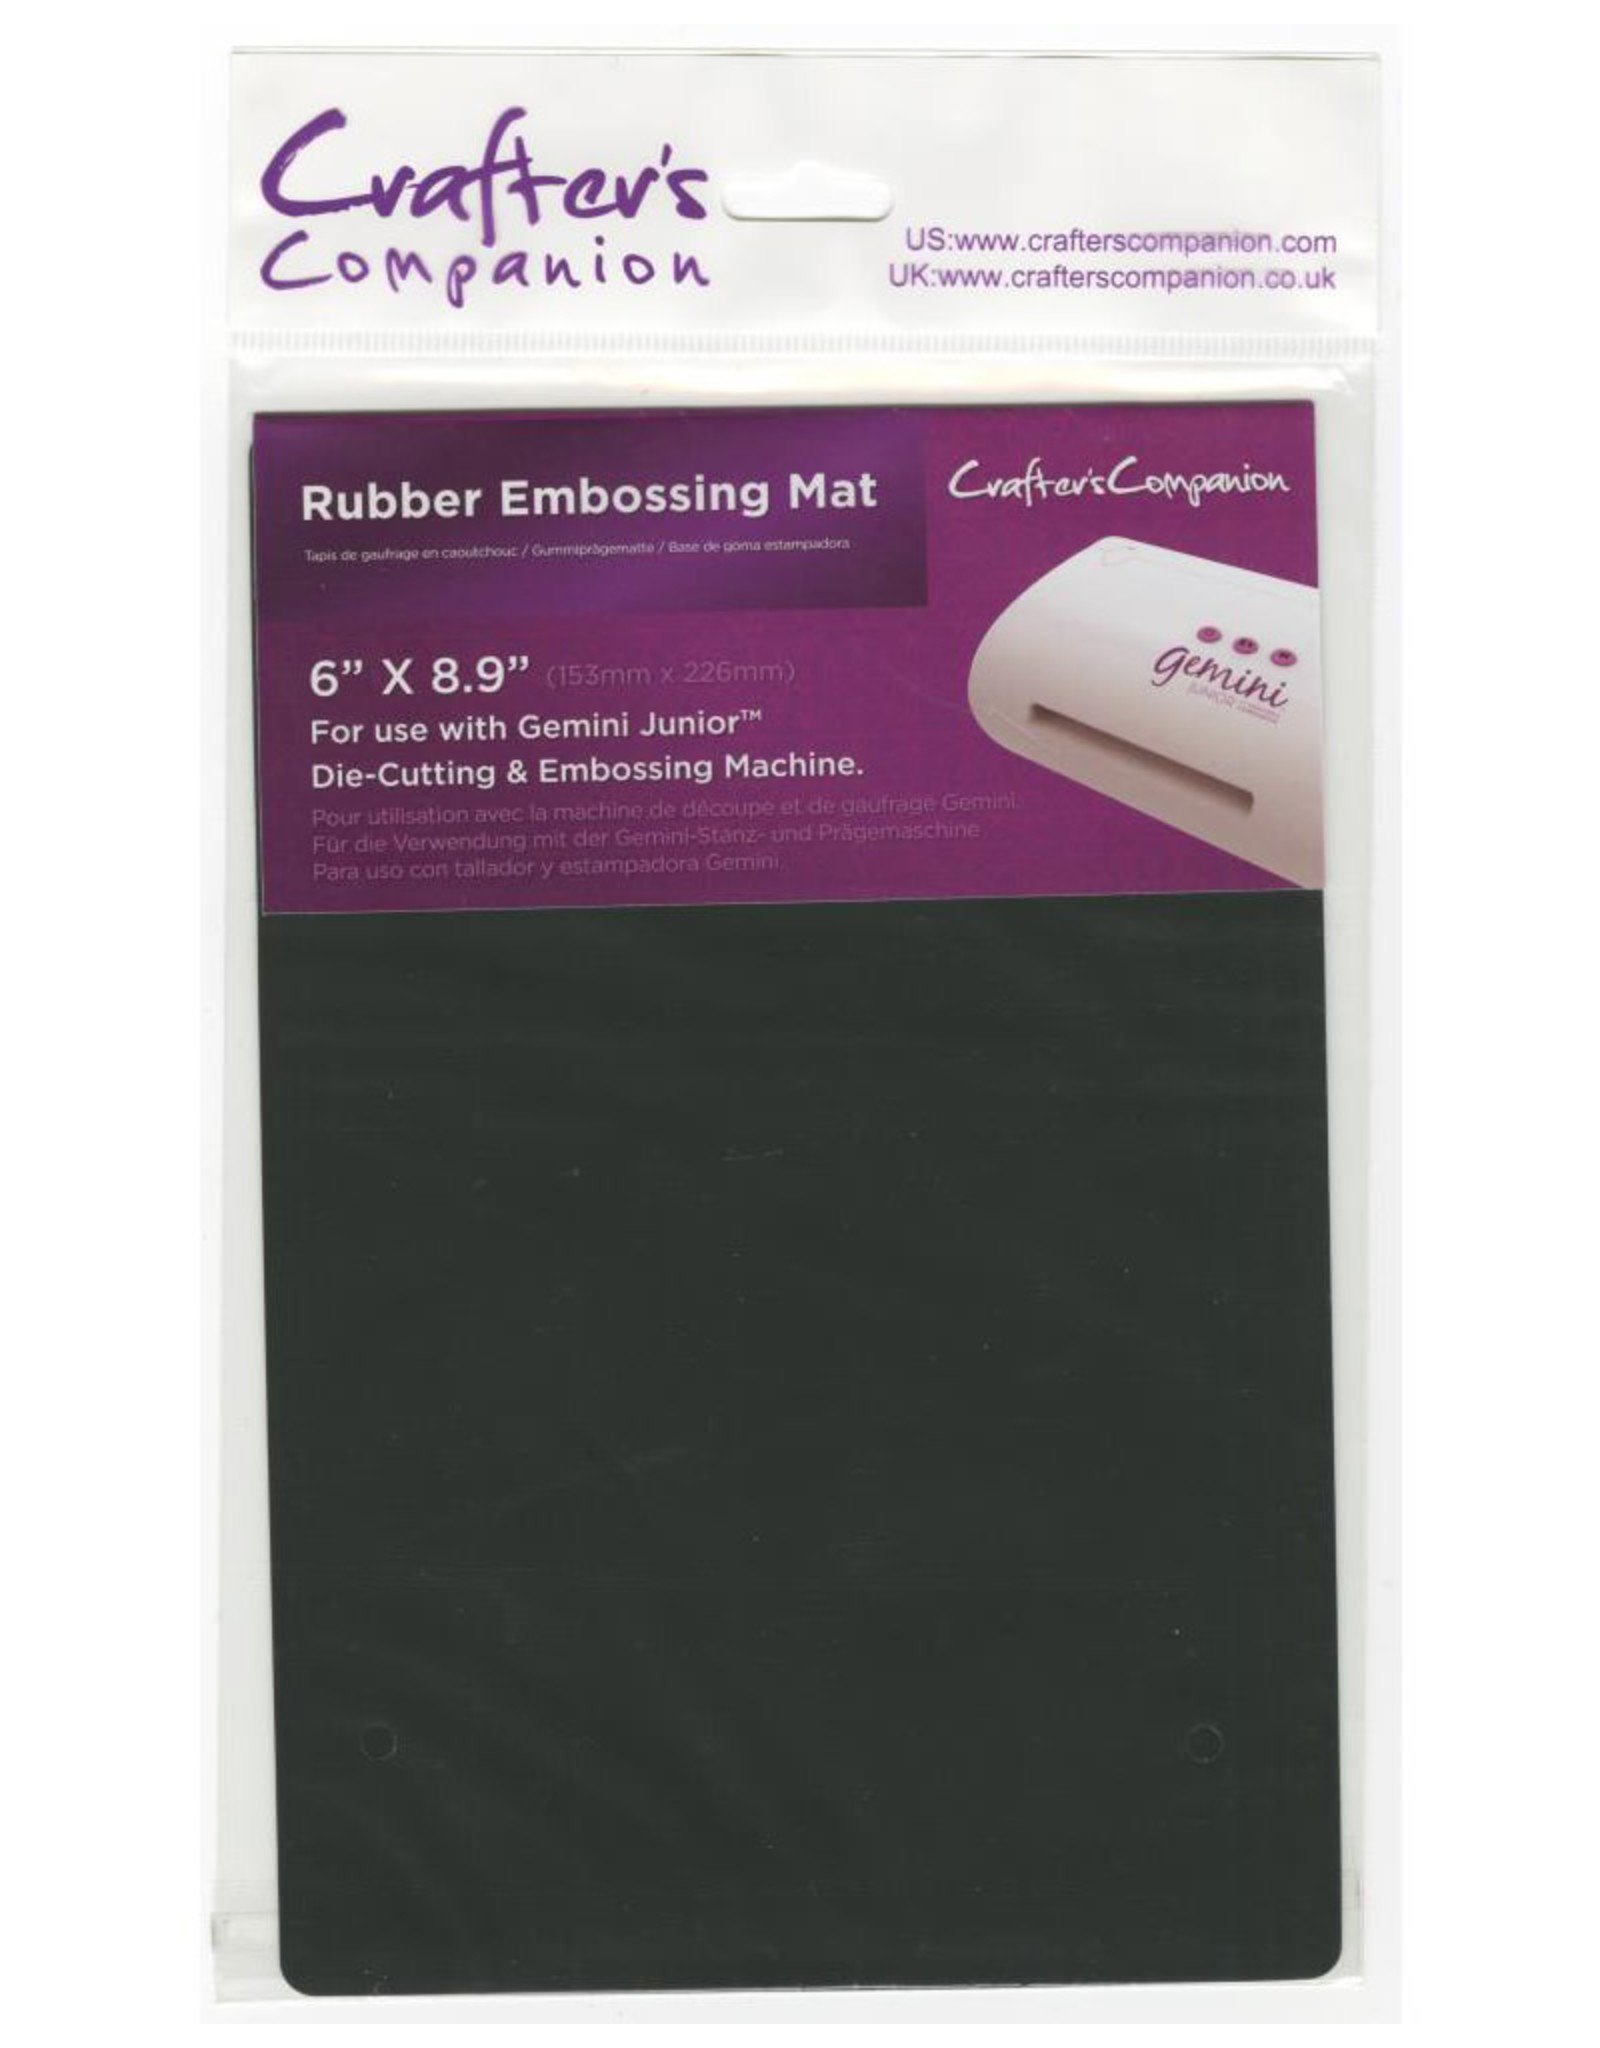 CRAFTERS COMPANION CRAFTER'S COMPANION RUBBER EMBOSSING MAT FOR GEMINI JUNIOR 6"X8.9"